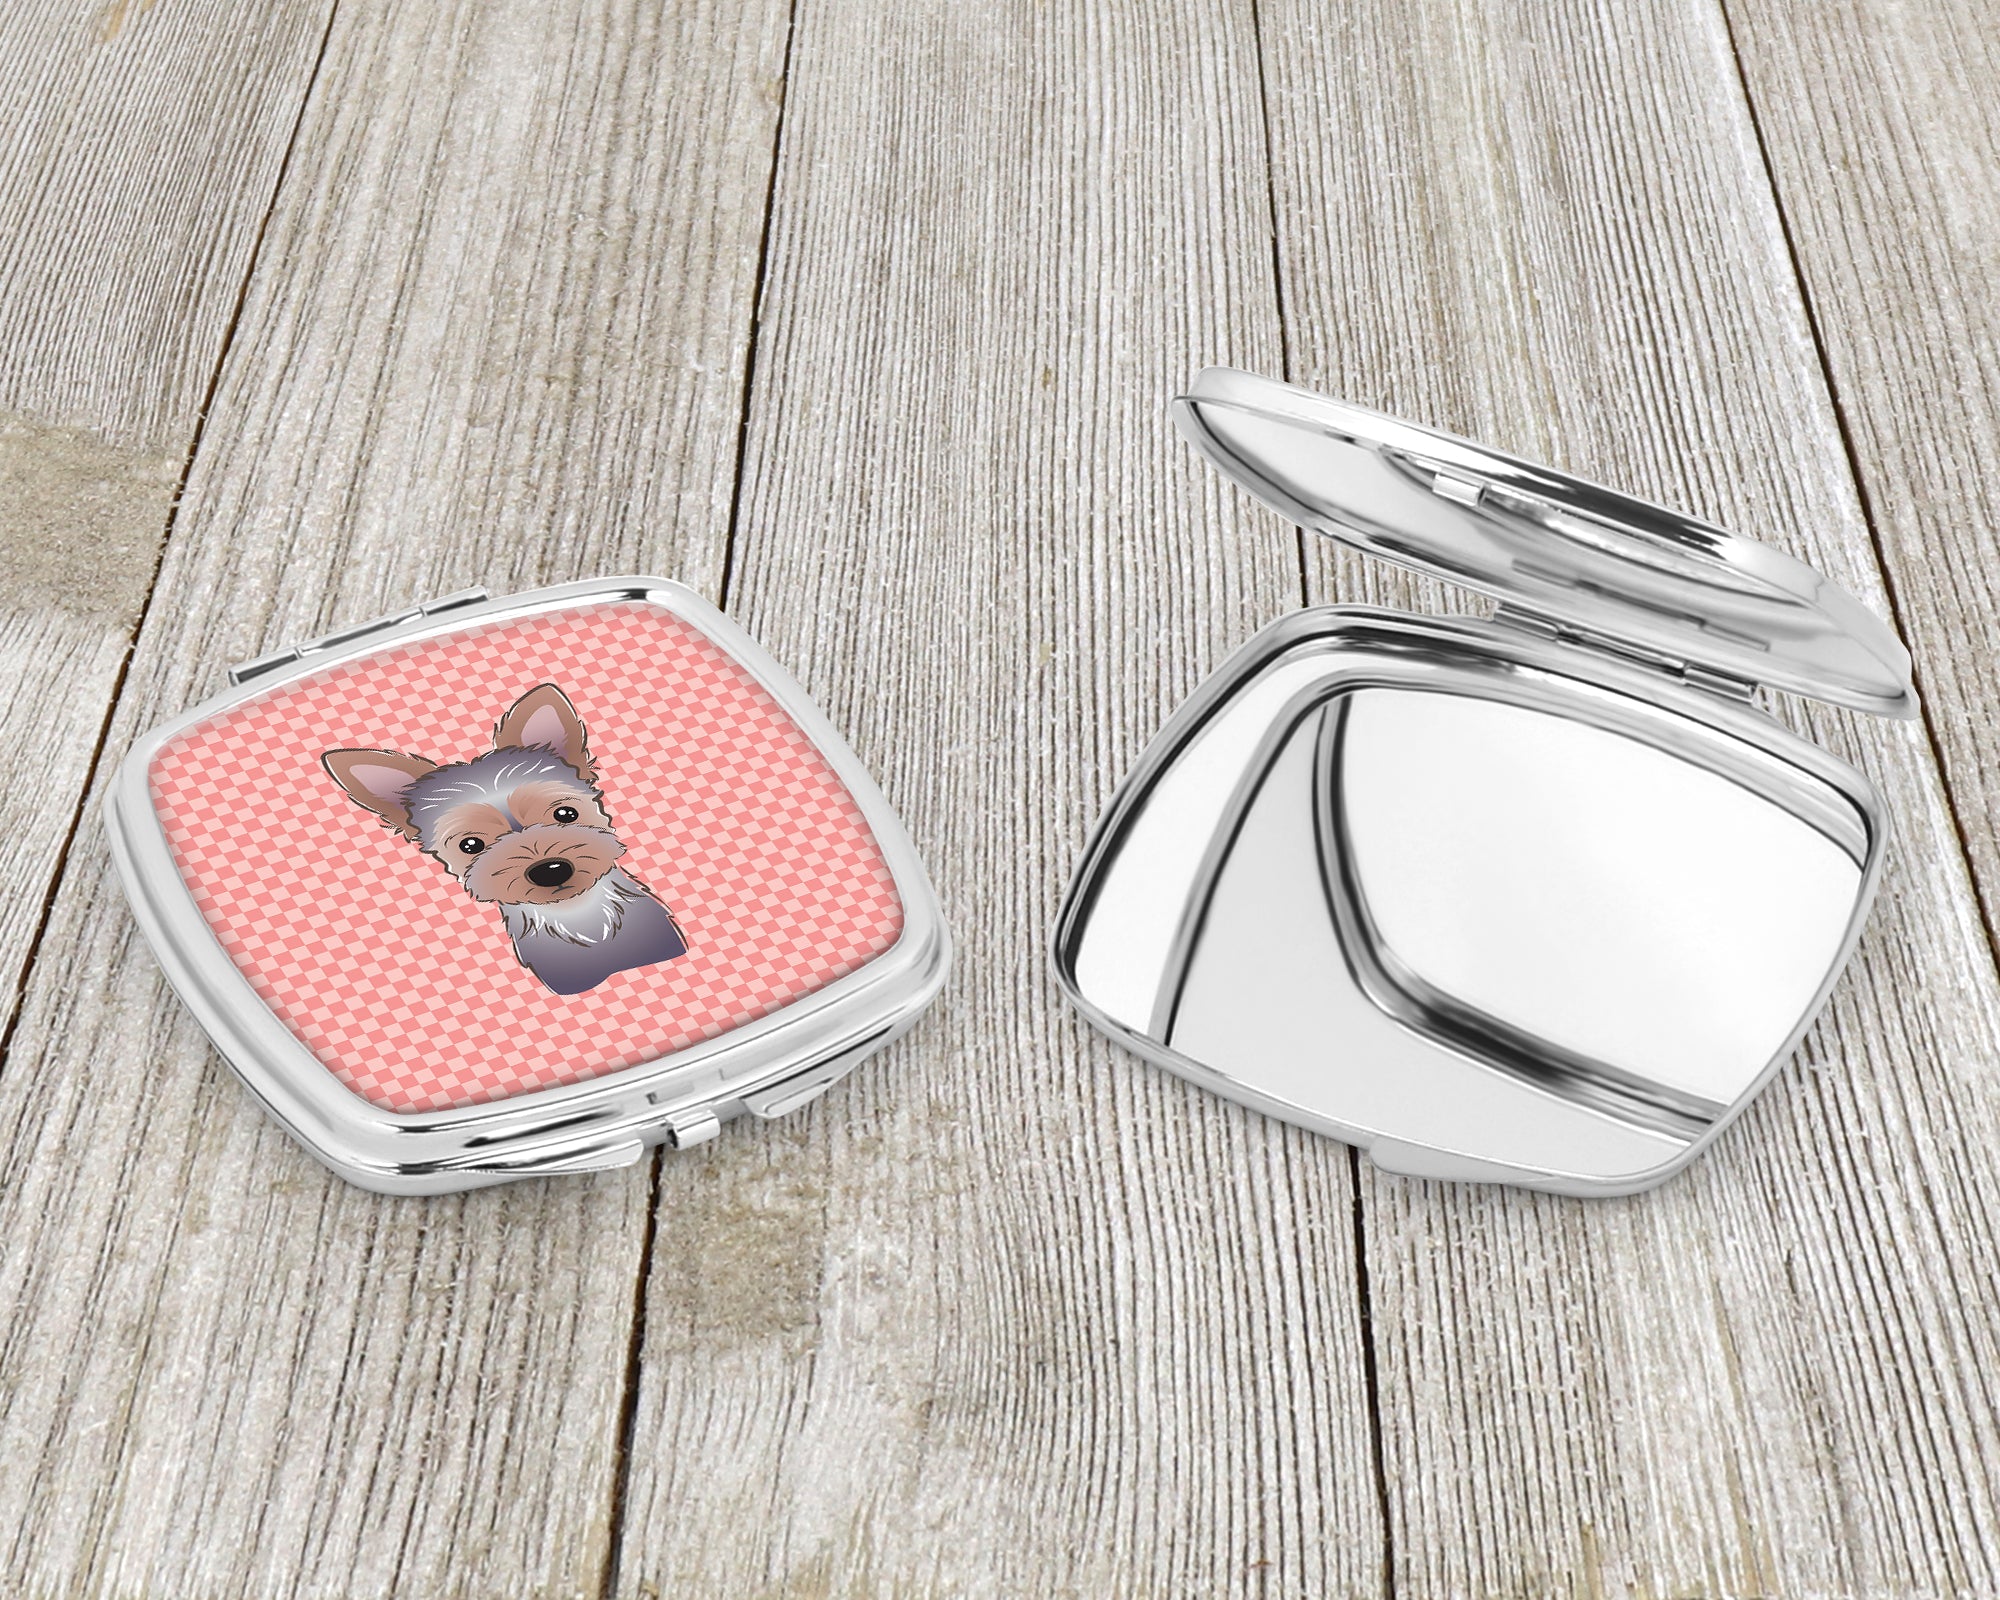 Checkerboard Pink Yorkie Puppy Compact Mirror BB1232SCM  the-store.com.